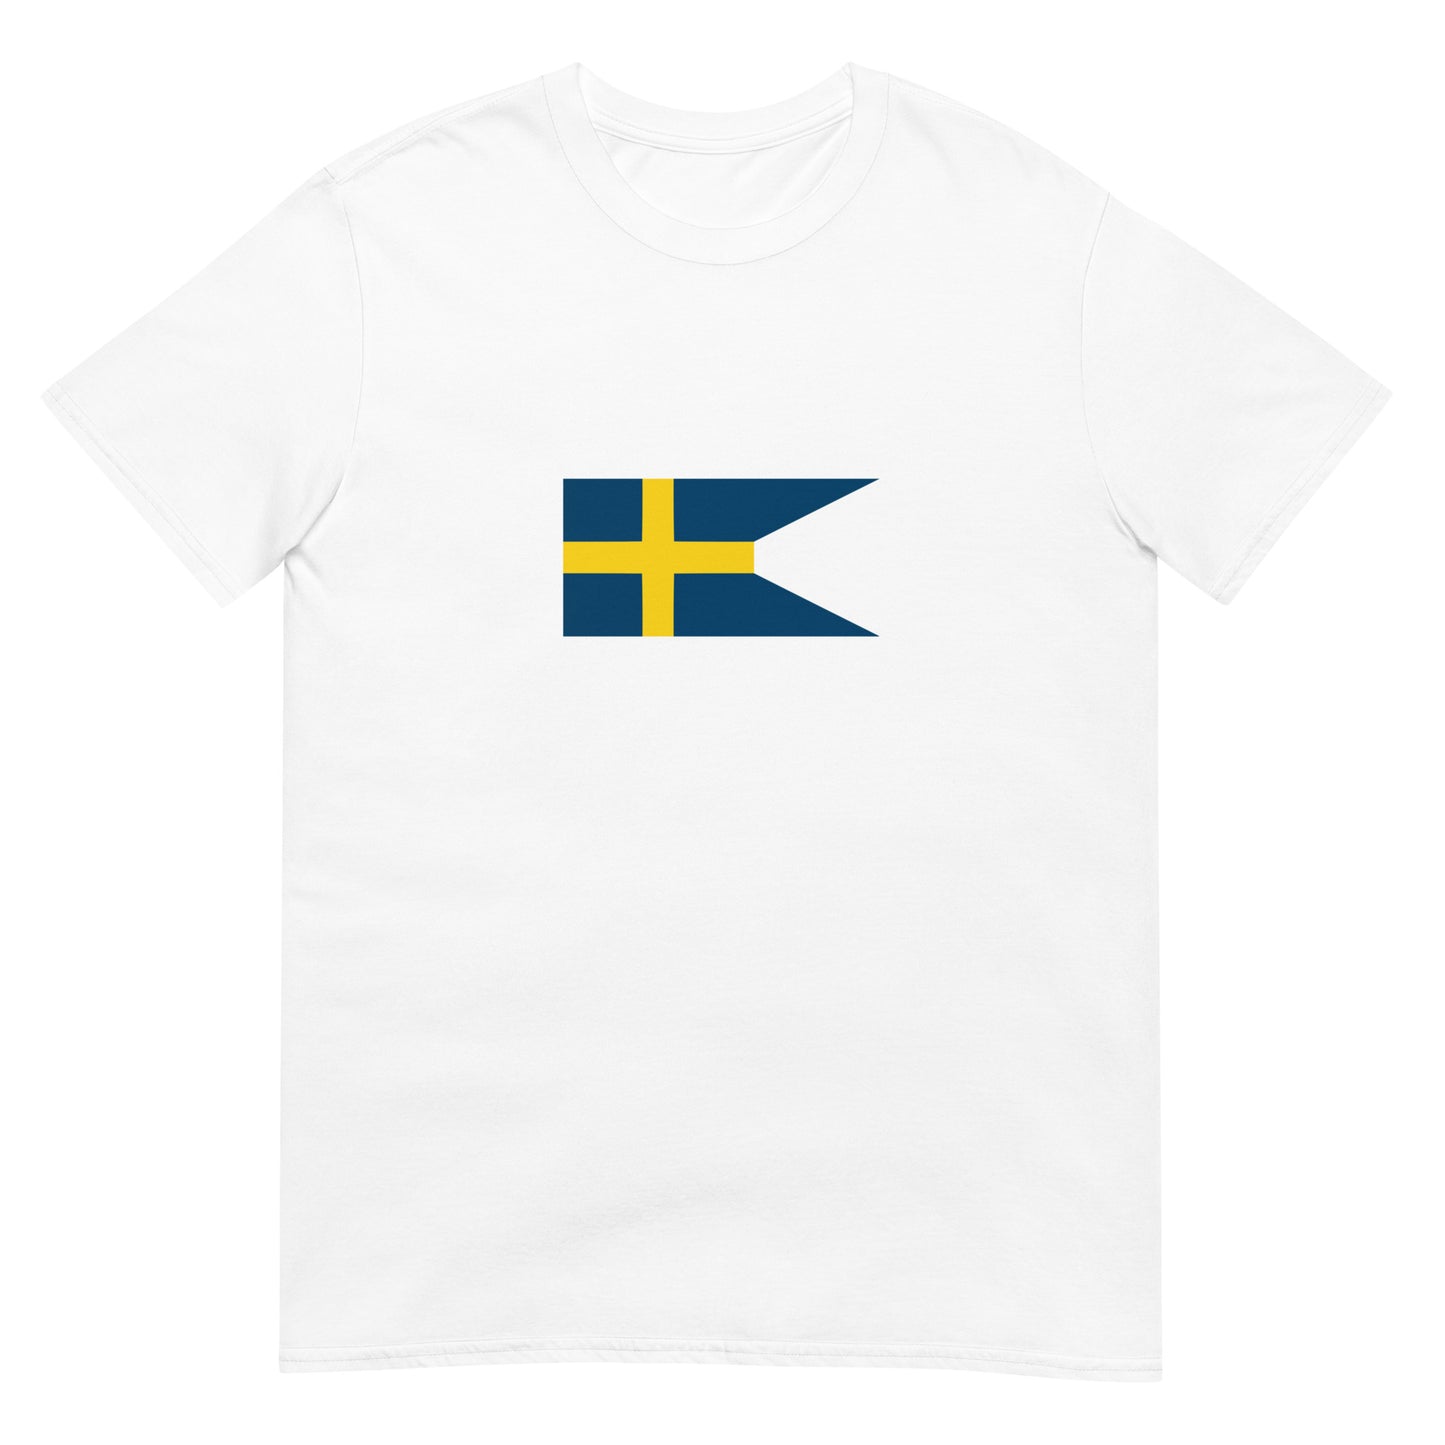 USA - New Sweden (1638-1655) | American Flag Interactive History T-Shirt